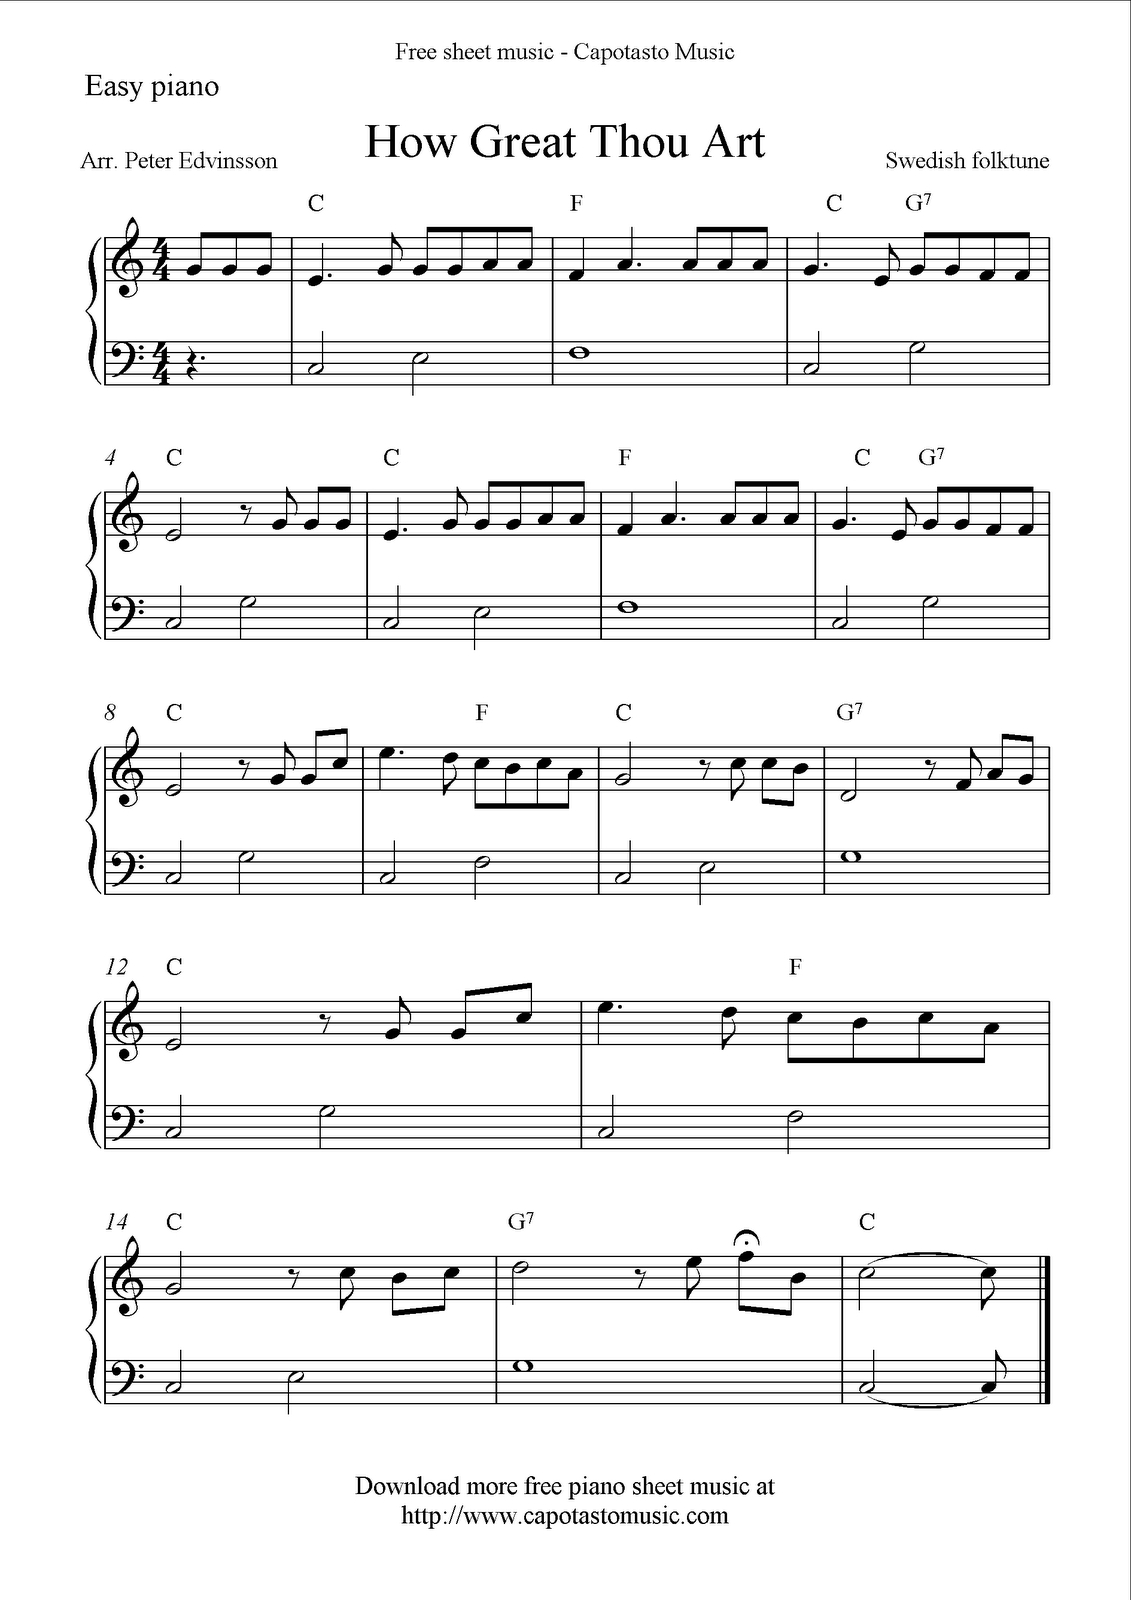 Free Sheet Music Pages &amp;amp; Guitar Lessons | Orchestra | Pinterest - Free Printable Guitar Music